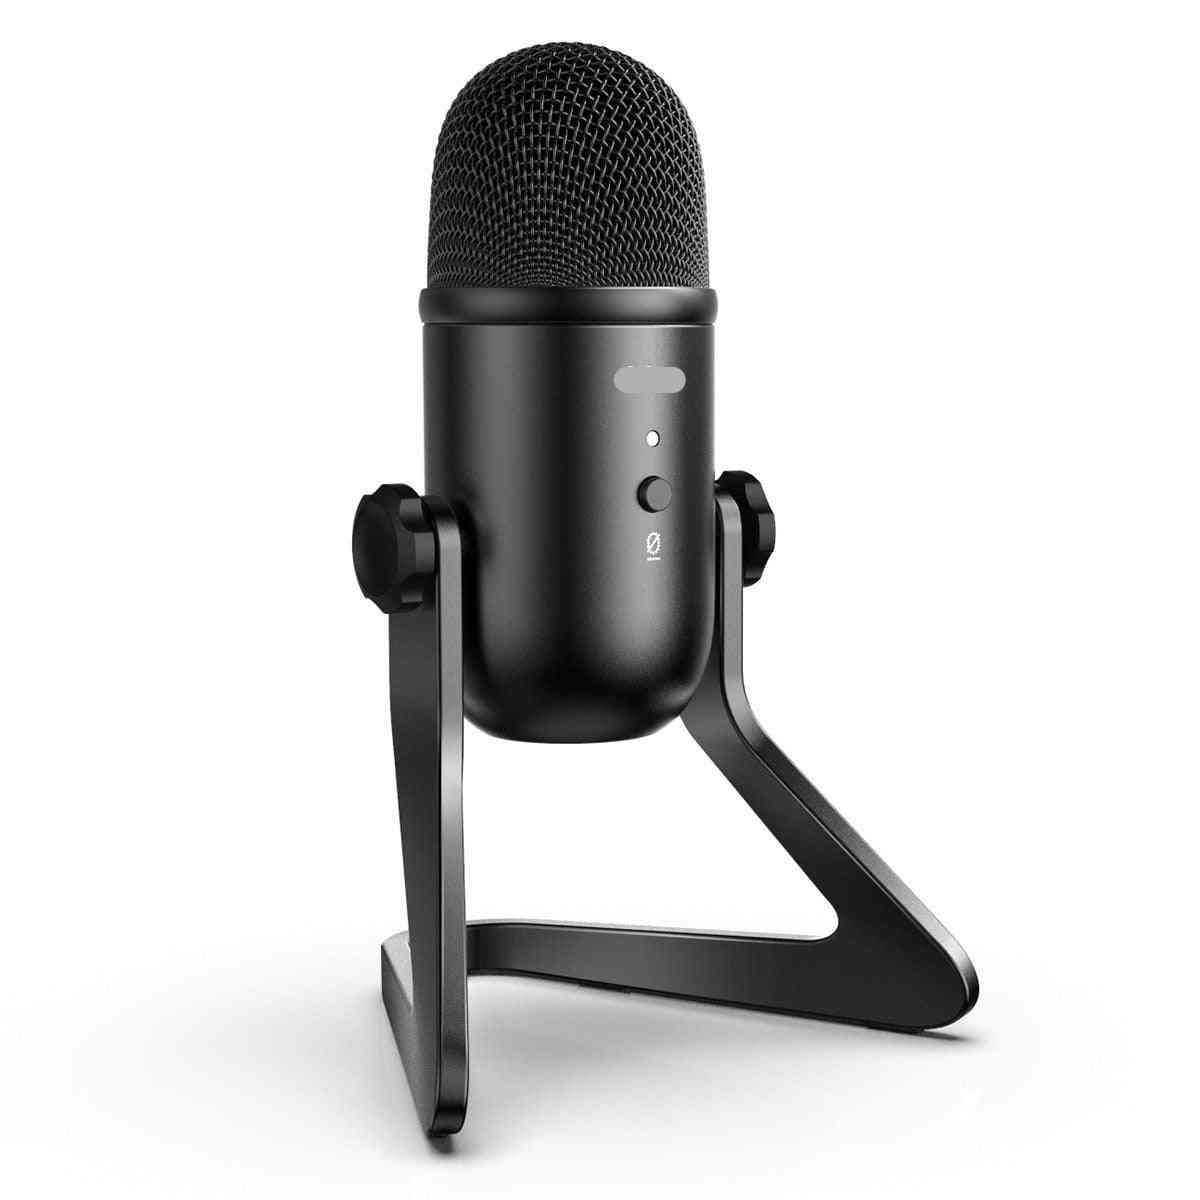 Usb Microphone For Recording/streaming/gaming